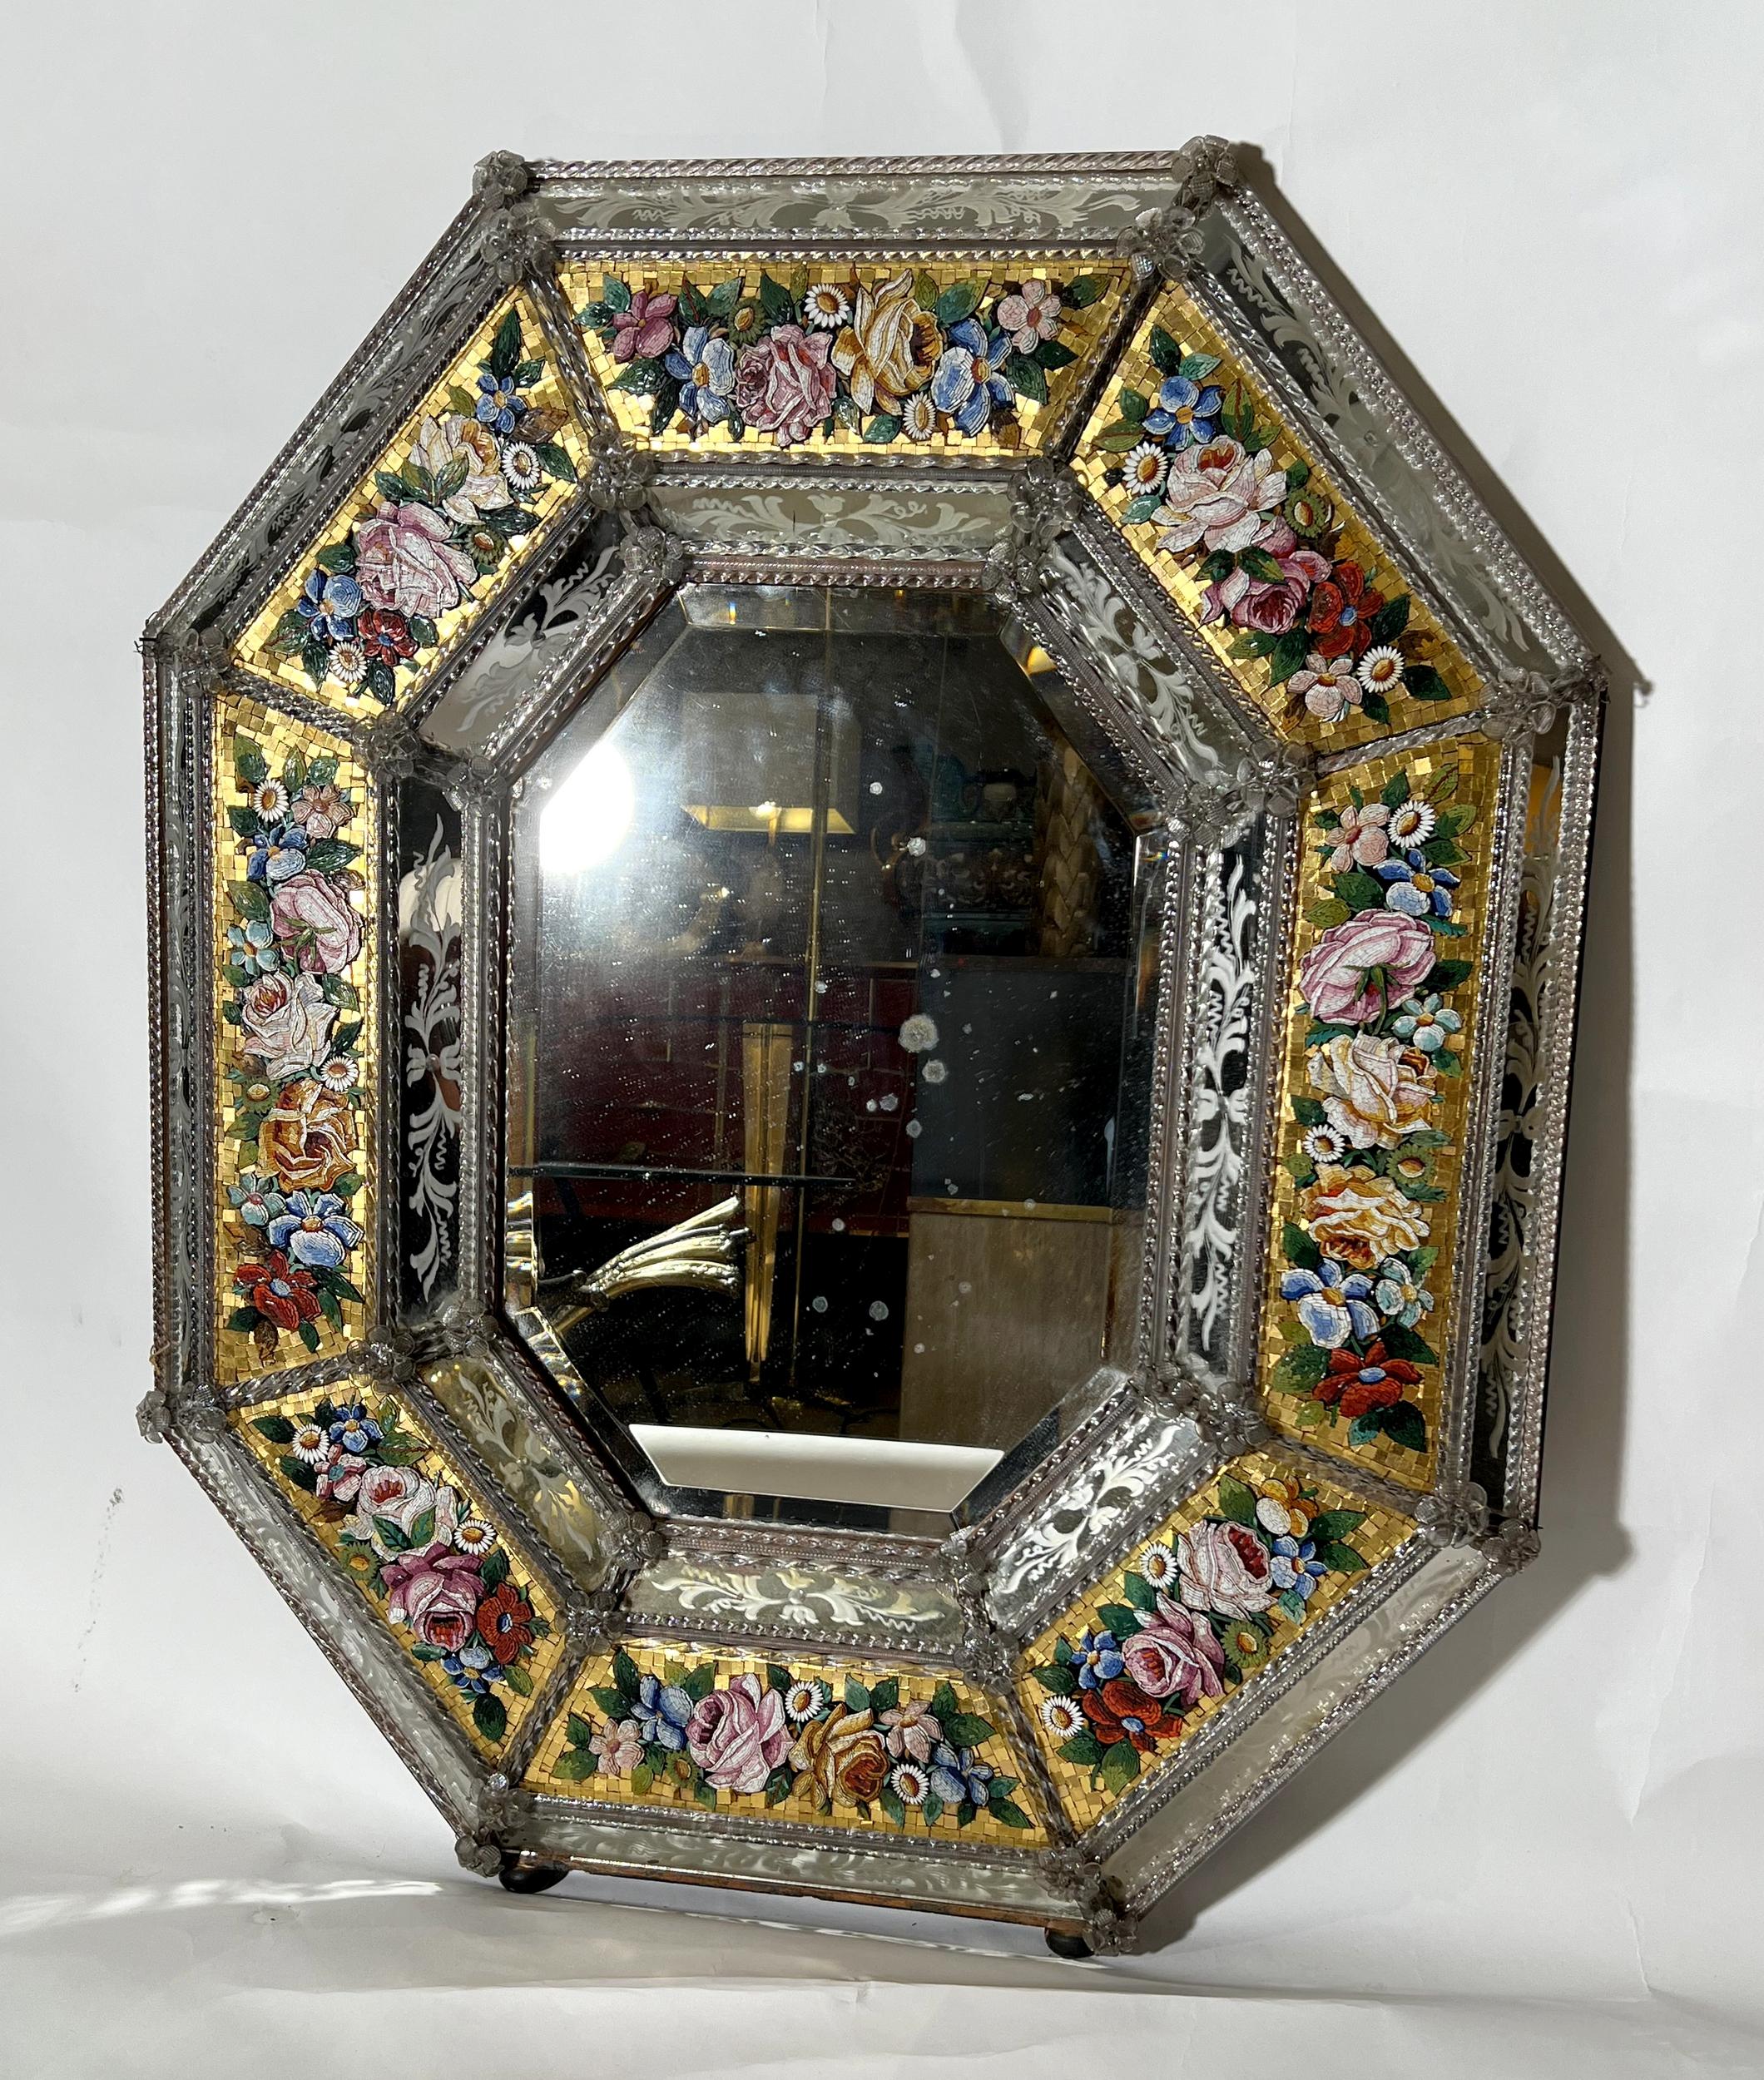 Rare octagonal Venetian mirror in etched glass and micro-mosaic, Exposition Universelle de 1867, Venice, Italy, circa 1865. Decorated with micro-mosaic cartouches featuring flowers, straw roses and foliage in light relief on a gold smaltis